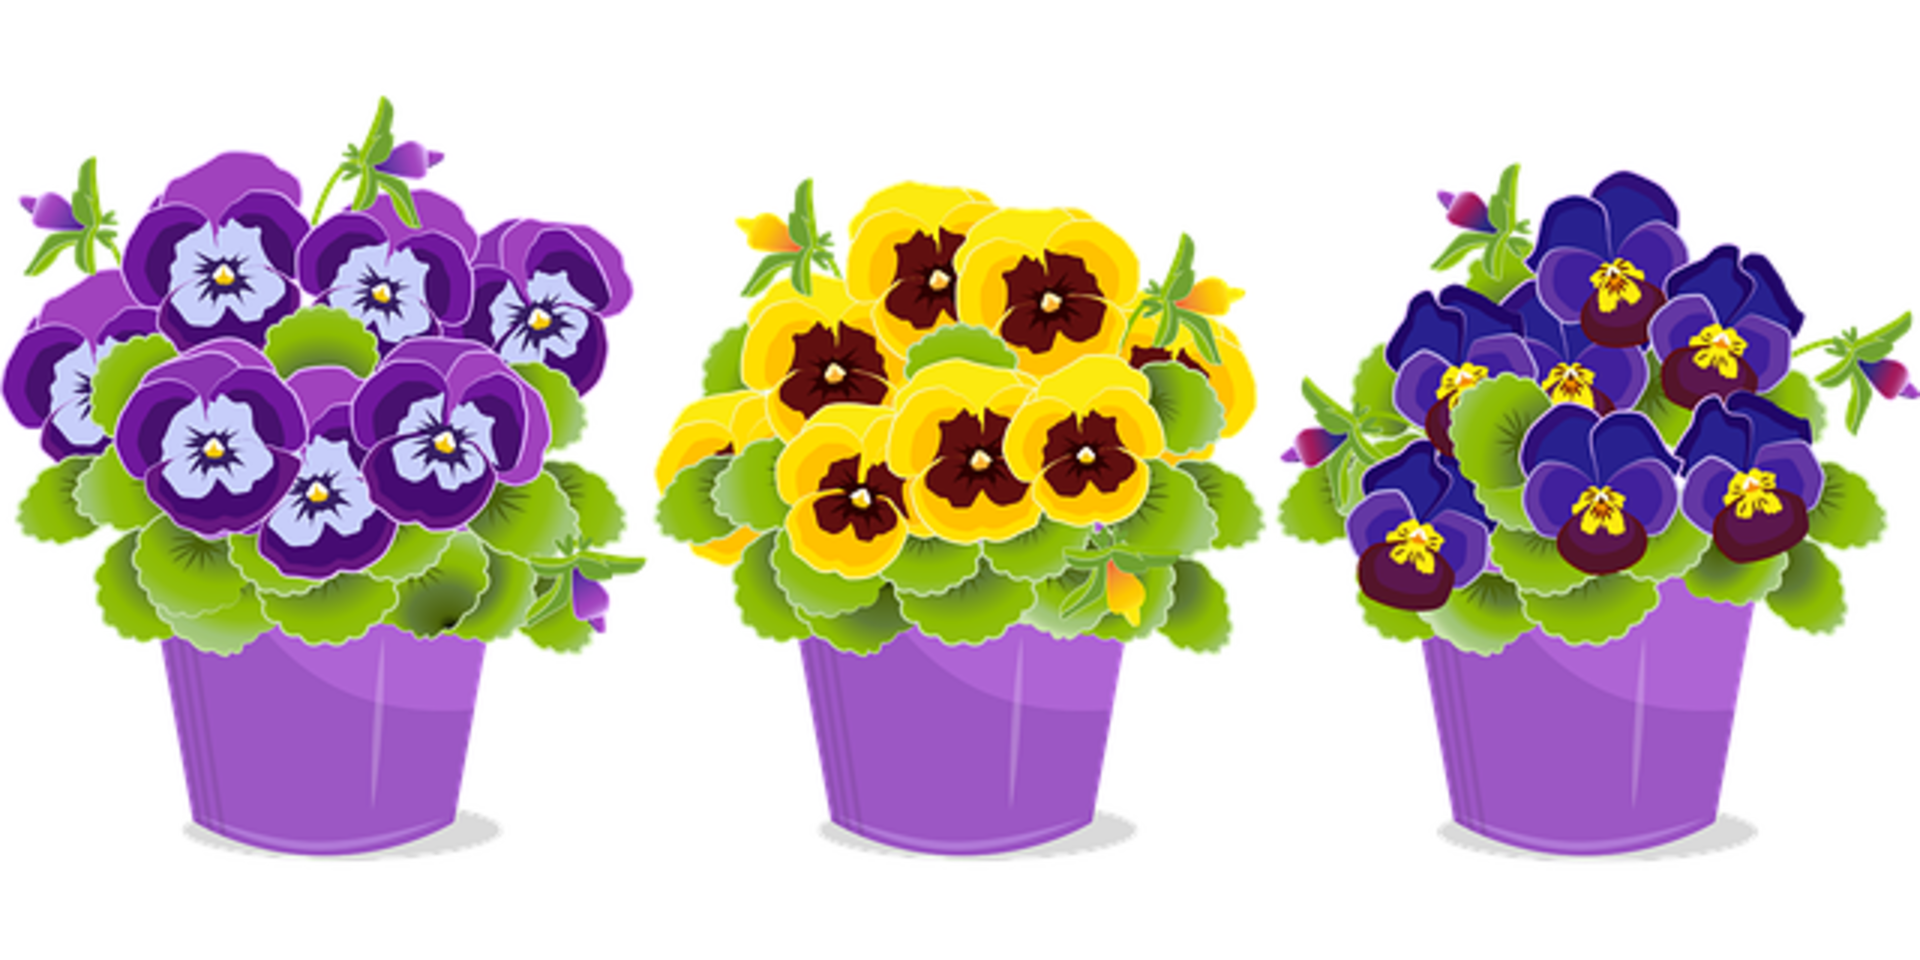 pansy-5142178_640.png